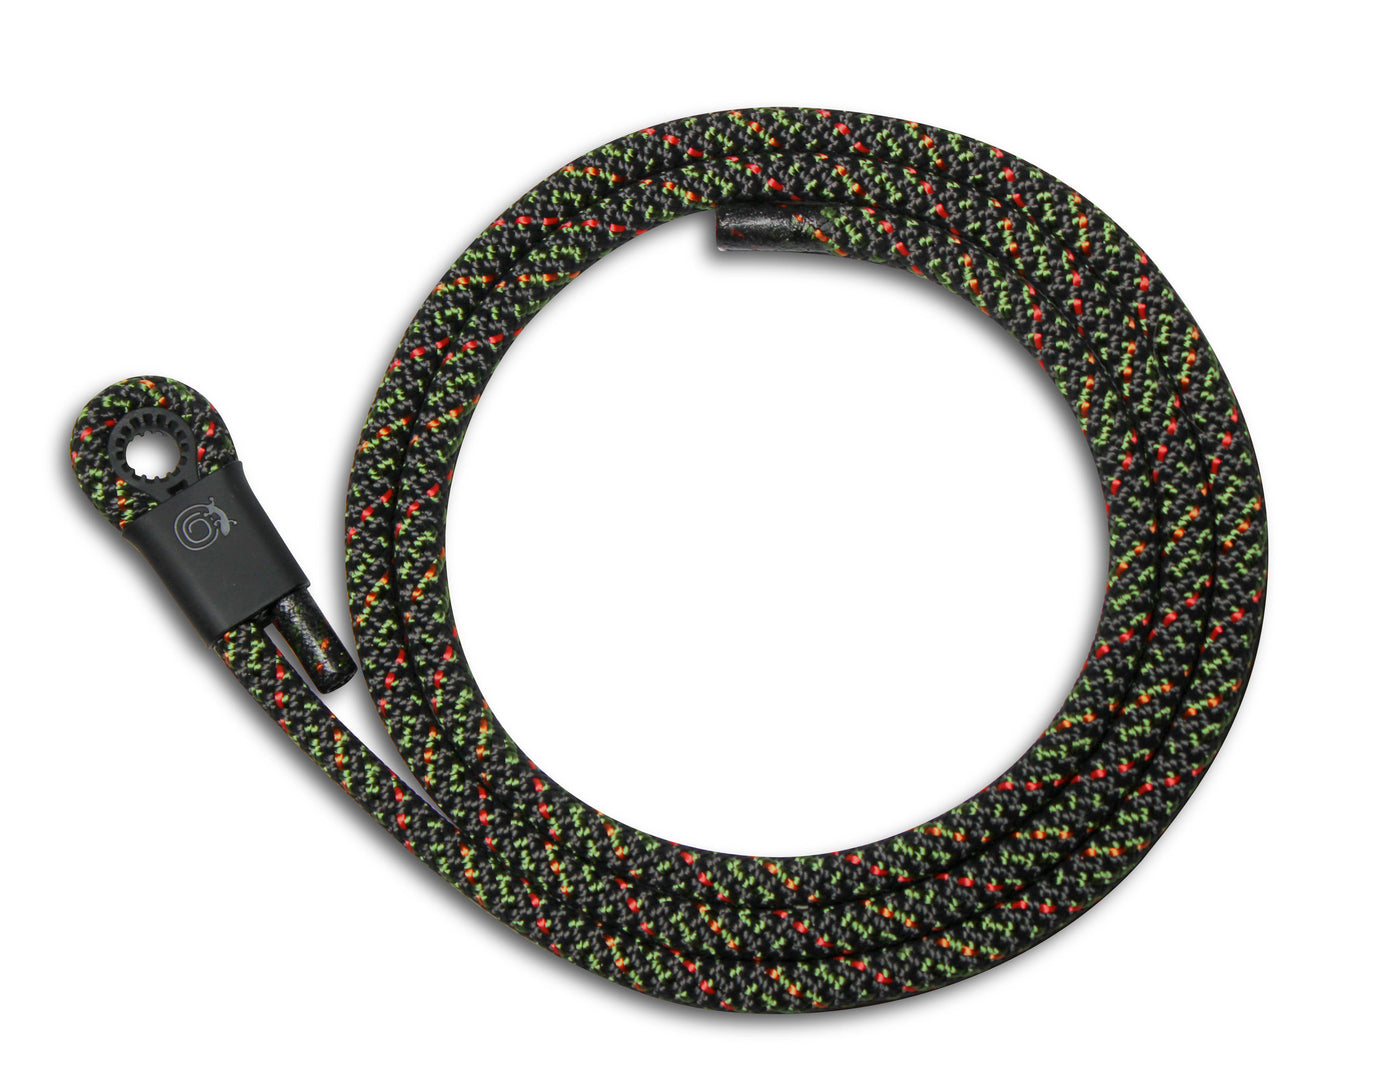 Lizard Tail Belts Newt black and olive rope belt